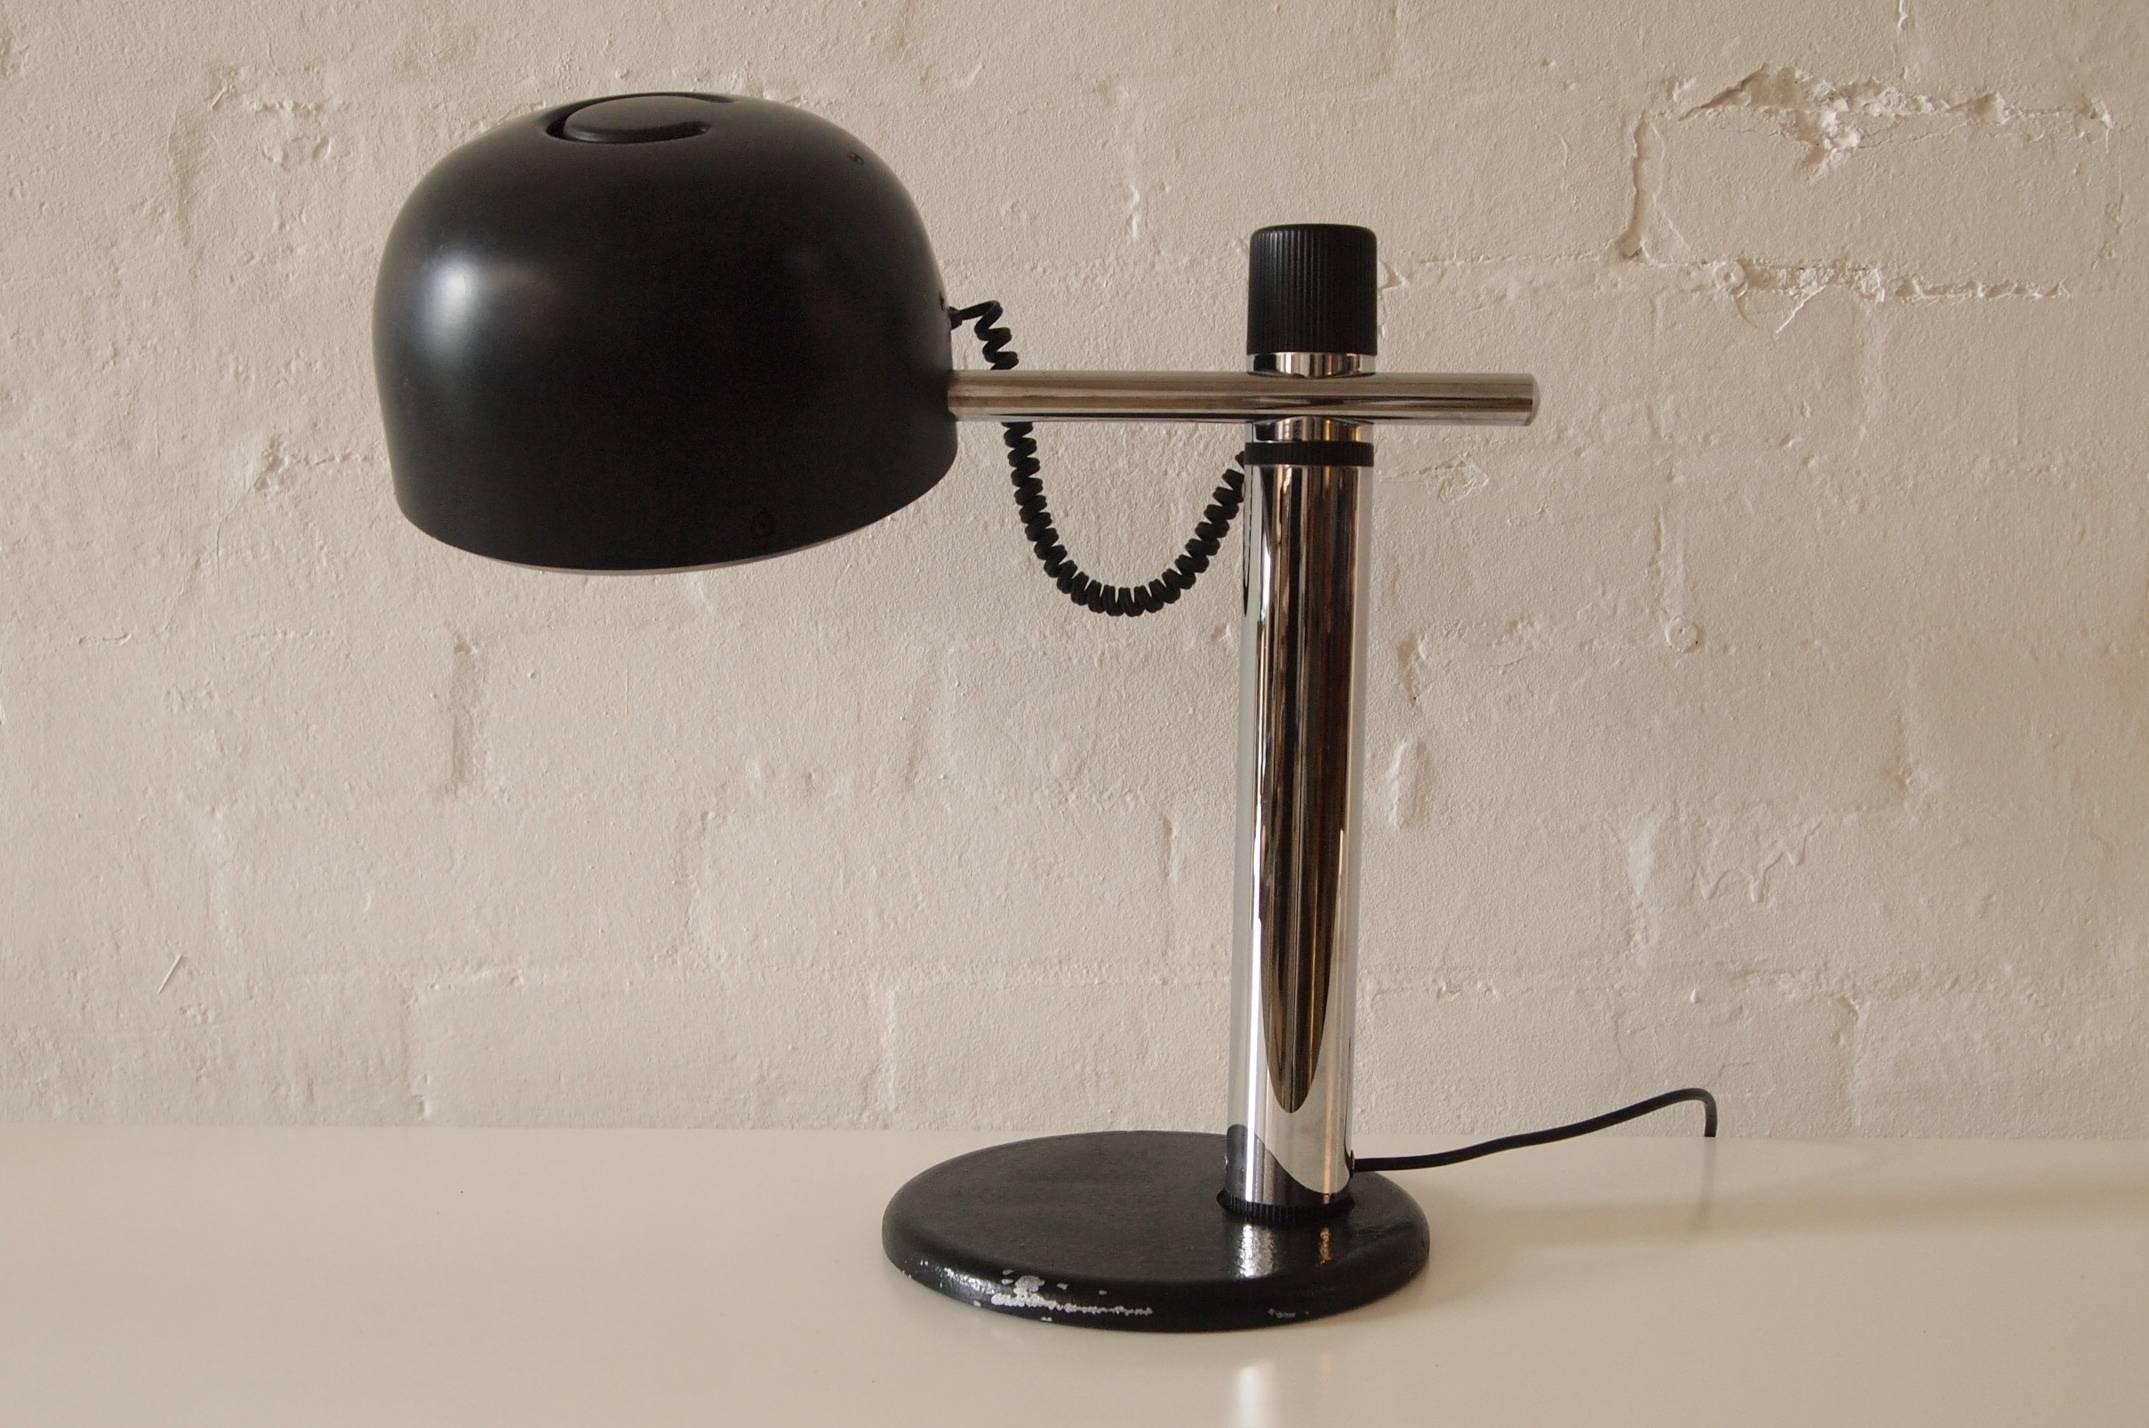 Brutalist style table or desk lamp in painted metal and chrome, circa 1970. The lamp head can be horizontally adjusted to a maximum width of 44cm.